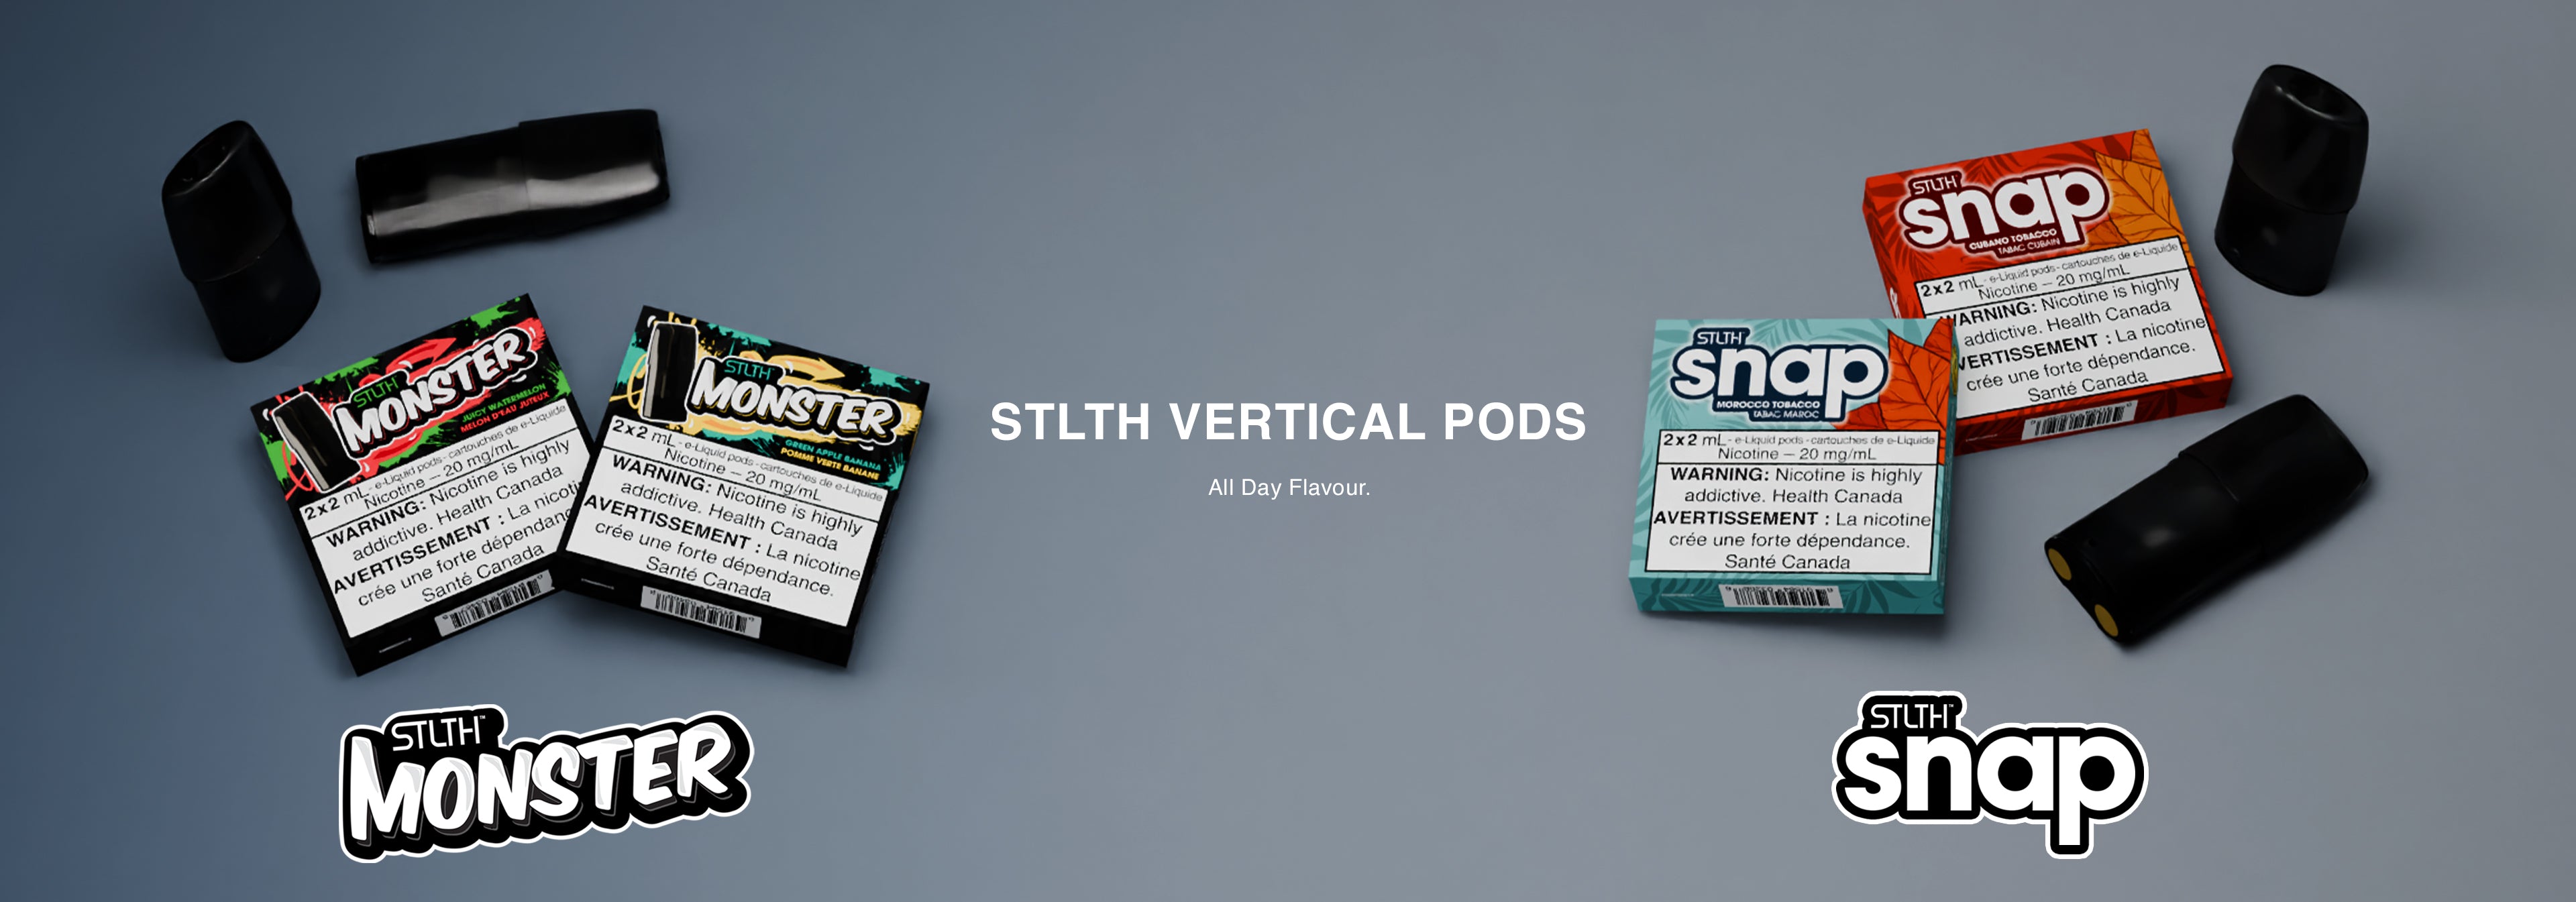 STLTH VERTICAL PODS: All Day Flavour.